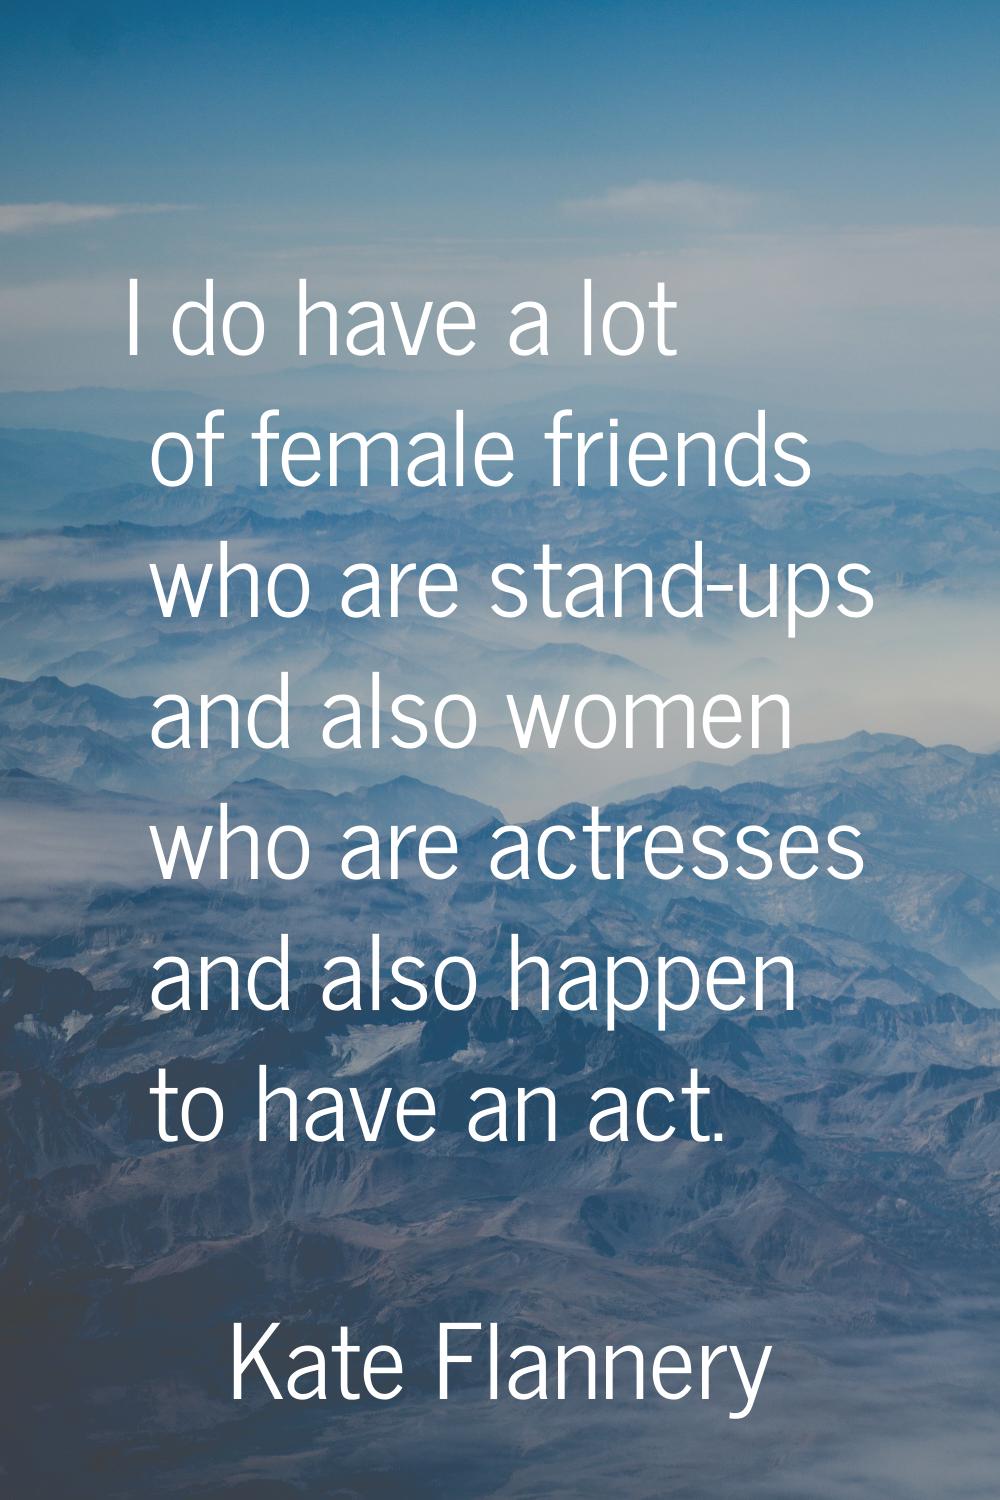 I do have a lot of female friends who are stand-ups and also women who are actresses and also happe